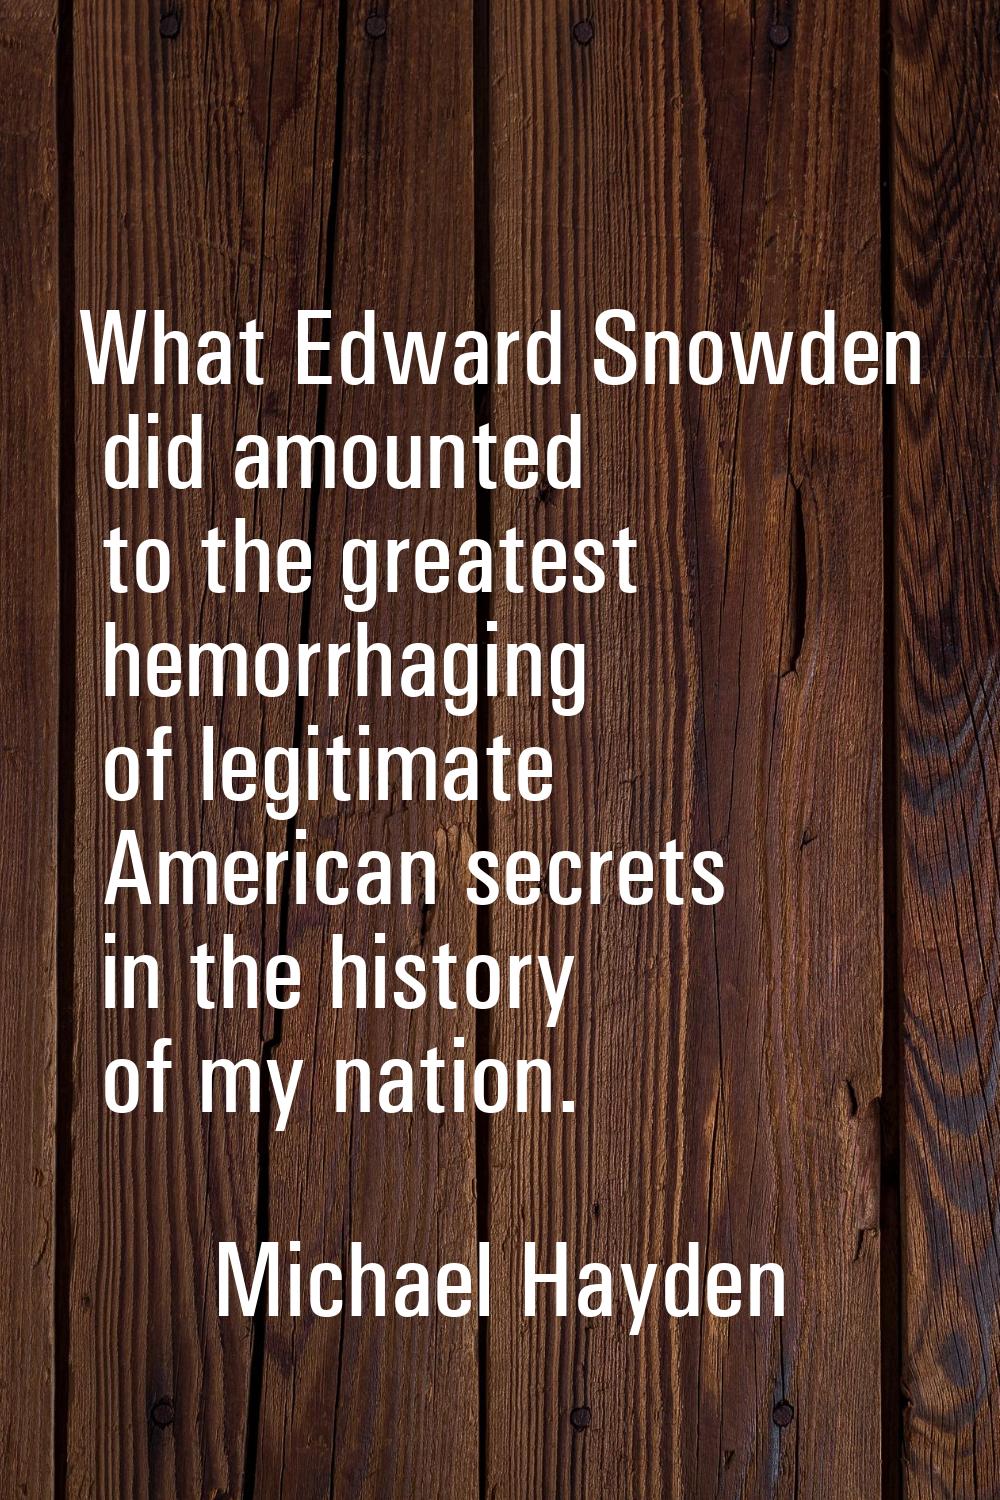 What Edward Snowden did amounted to the greatest hemorrhaging of legitimate American secrets in the